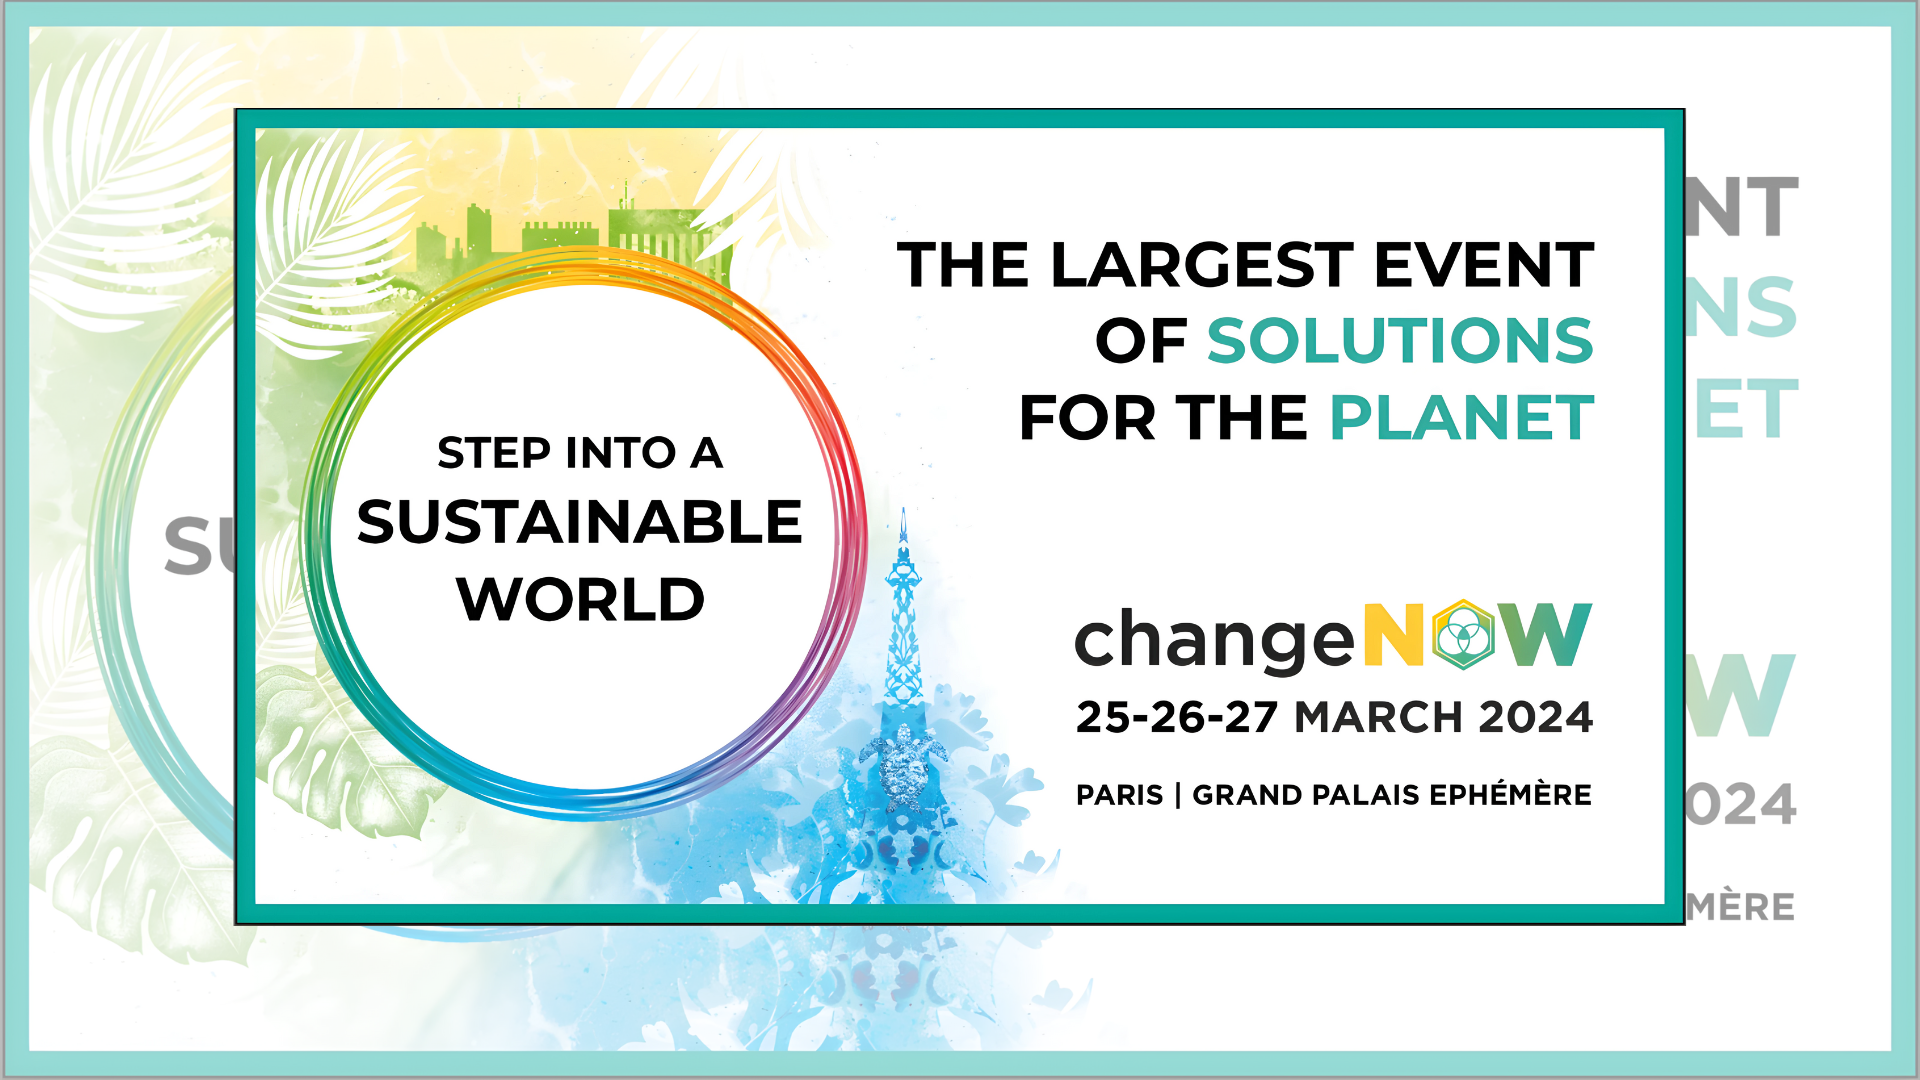 CHANGENOW : STEP INTO A SUSTAINABLE WORLD